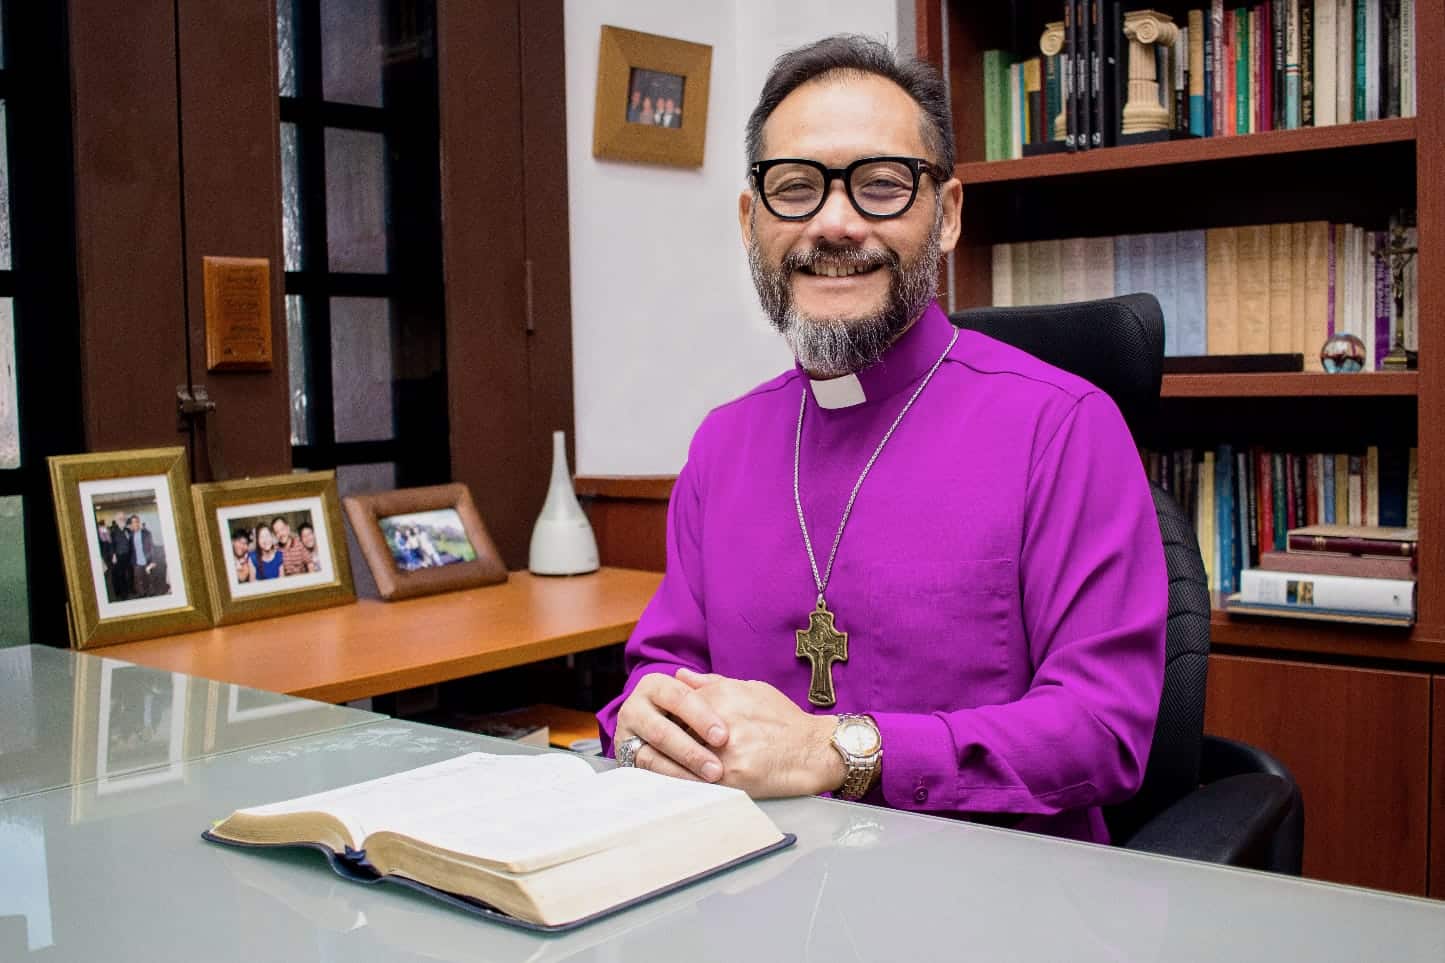 Bishop Titus Chung will succeed the Most Reverend Datuk Melter Jiki Tais, who has served as Archbishop of the Province since 2020.